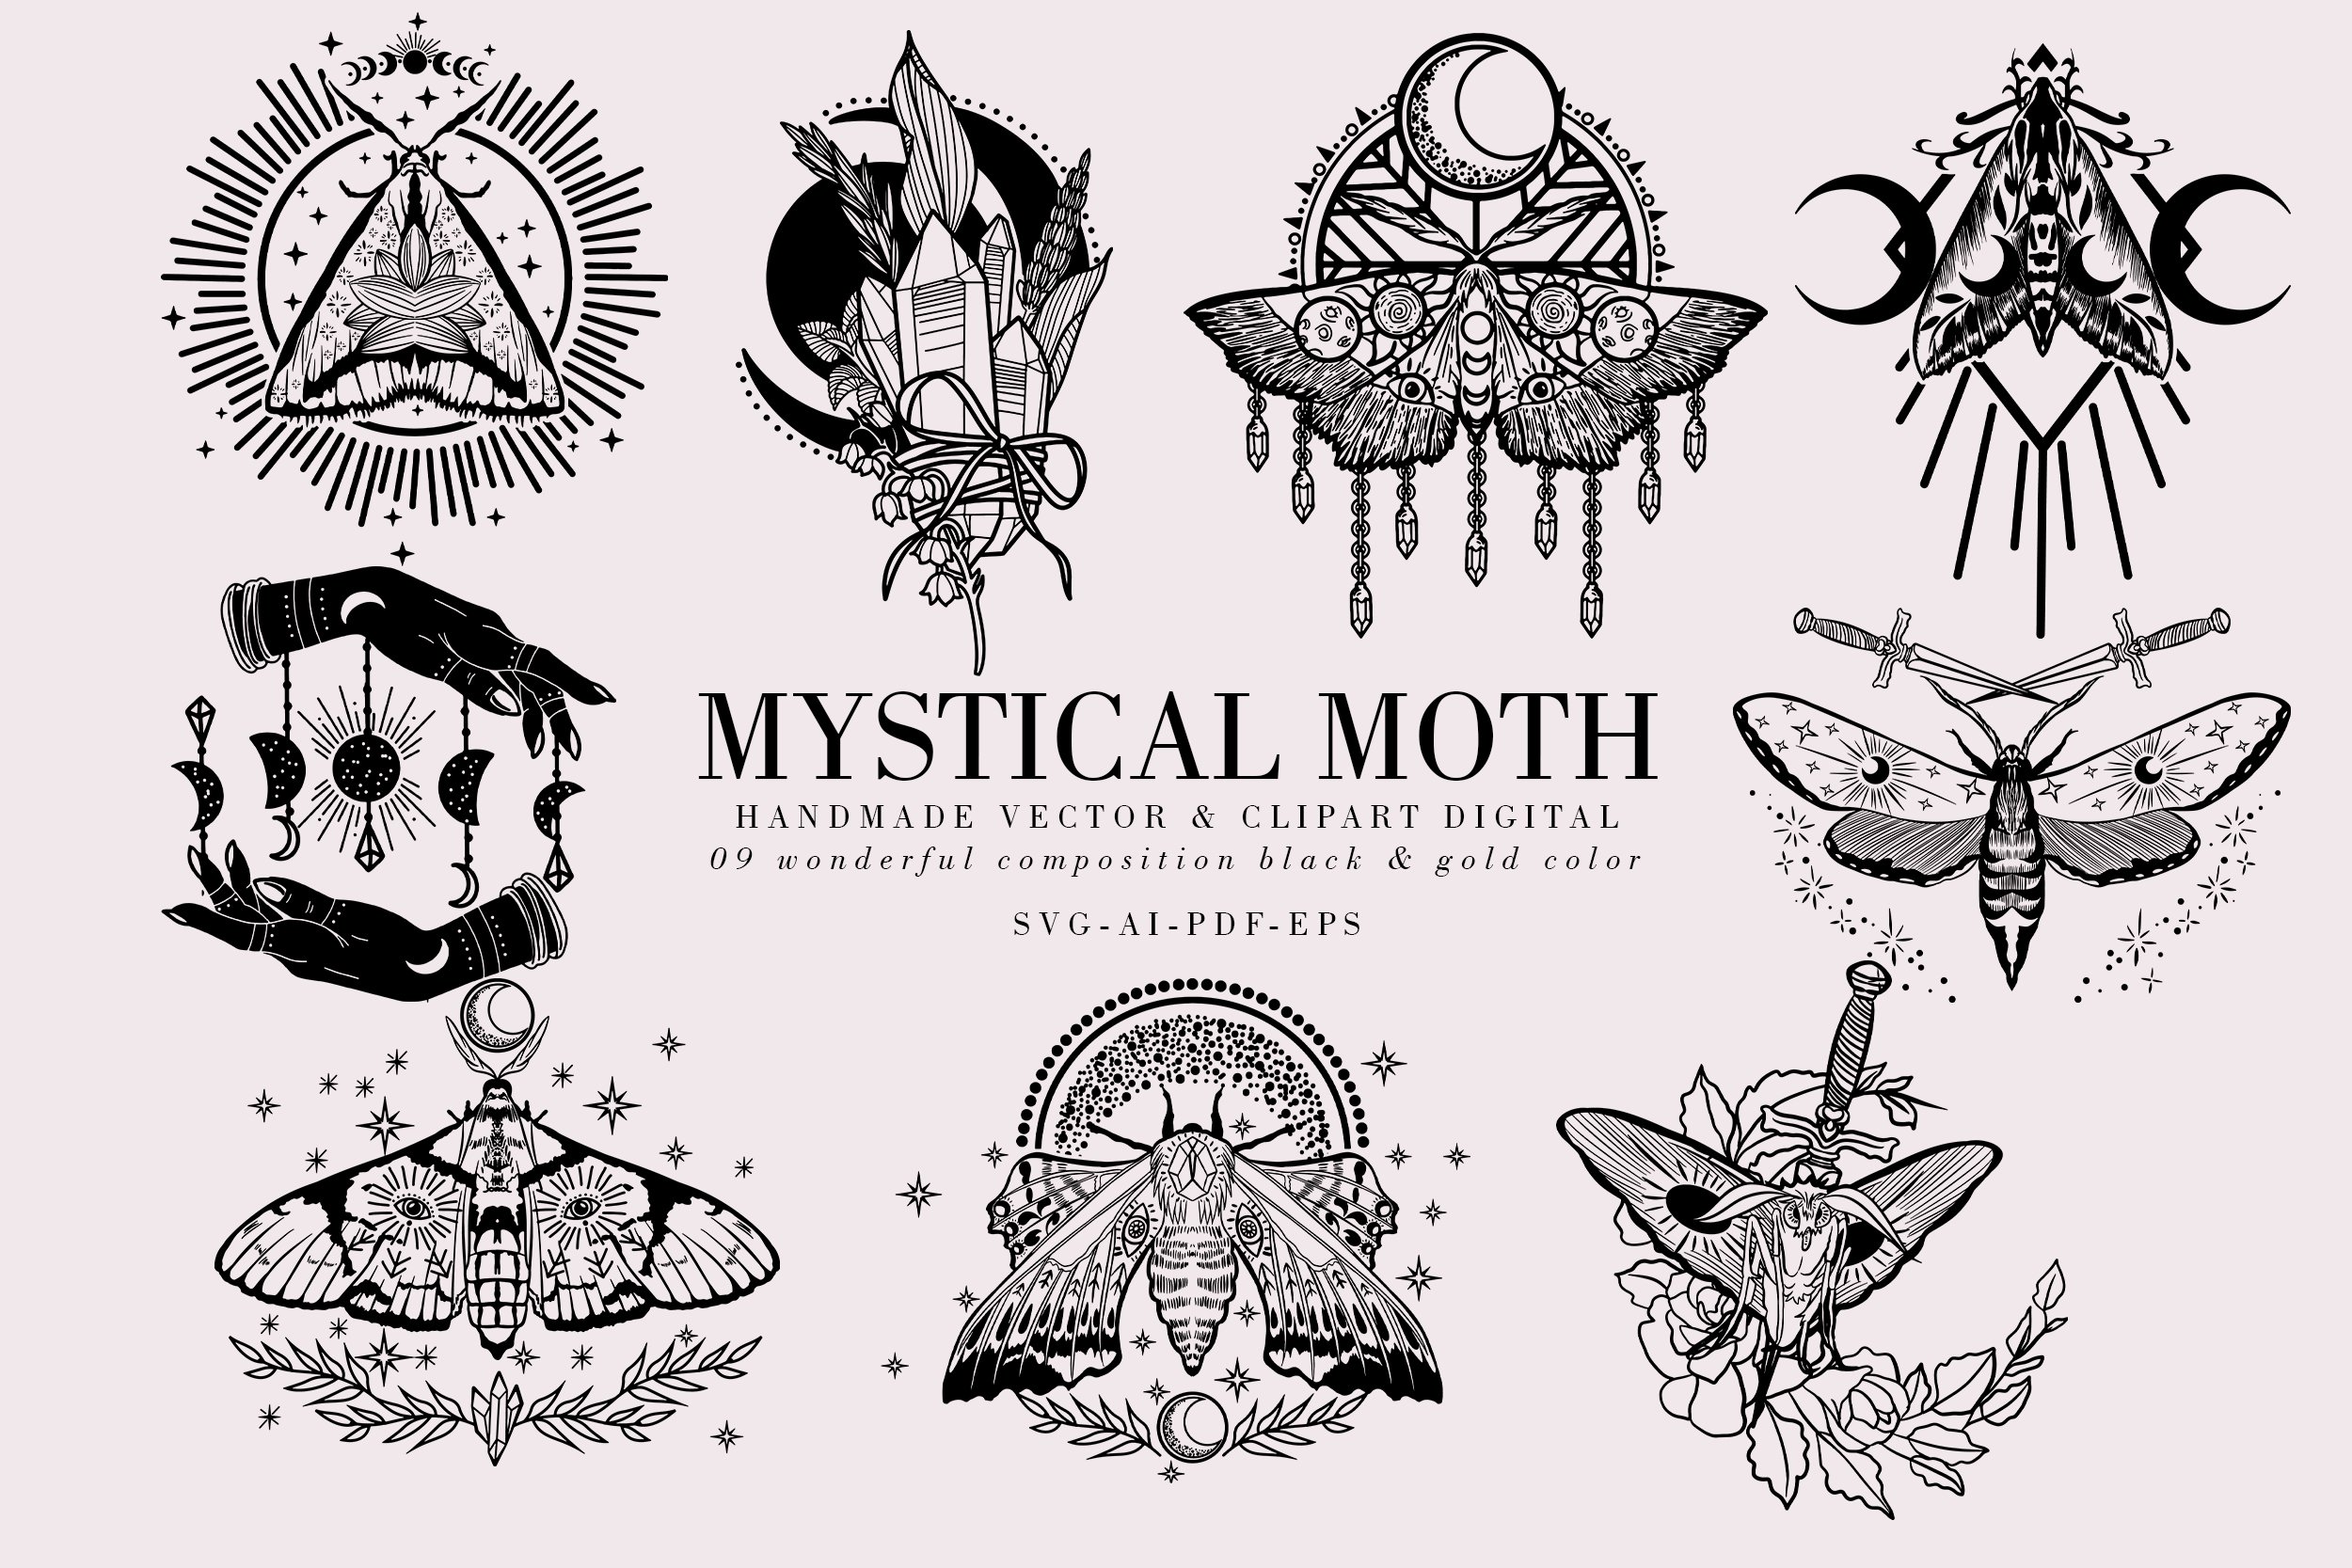 Mystical Moth cover image.